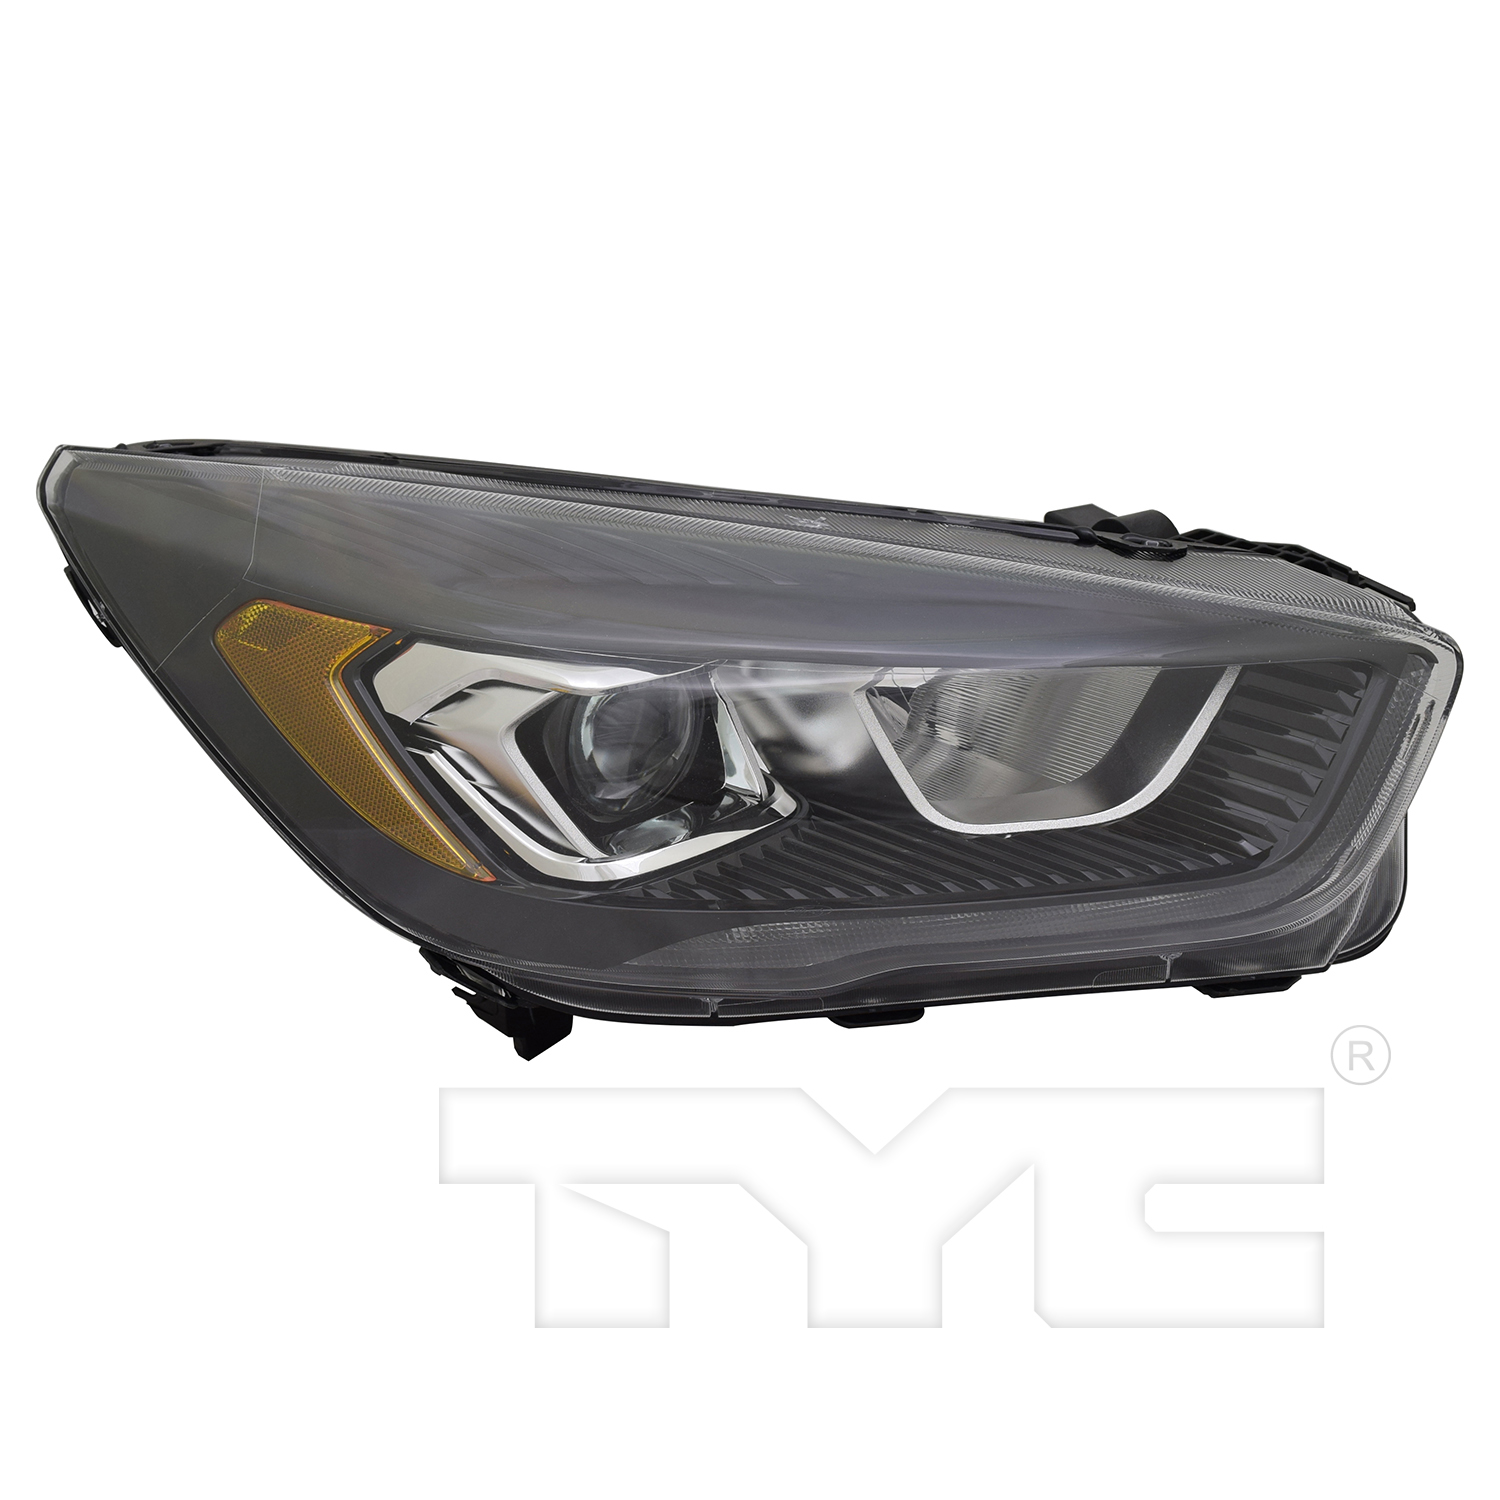 Aftermarket HEADLIGHTS for FORD - ESCAPE, ESCAPE,17-19,RT Headlamp assy composite